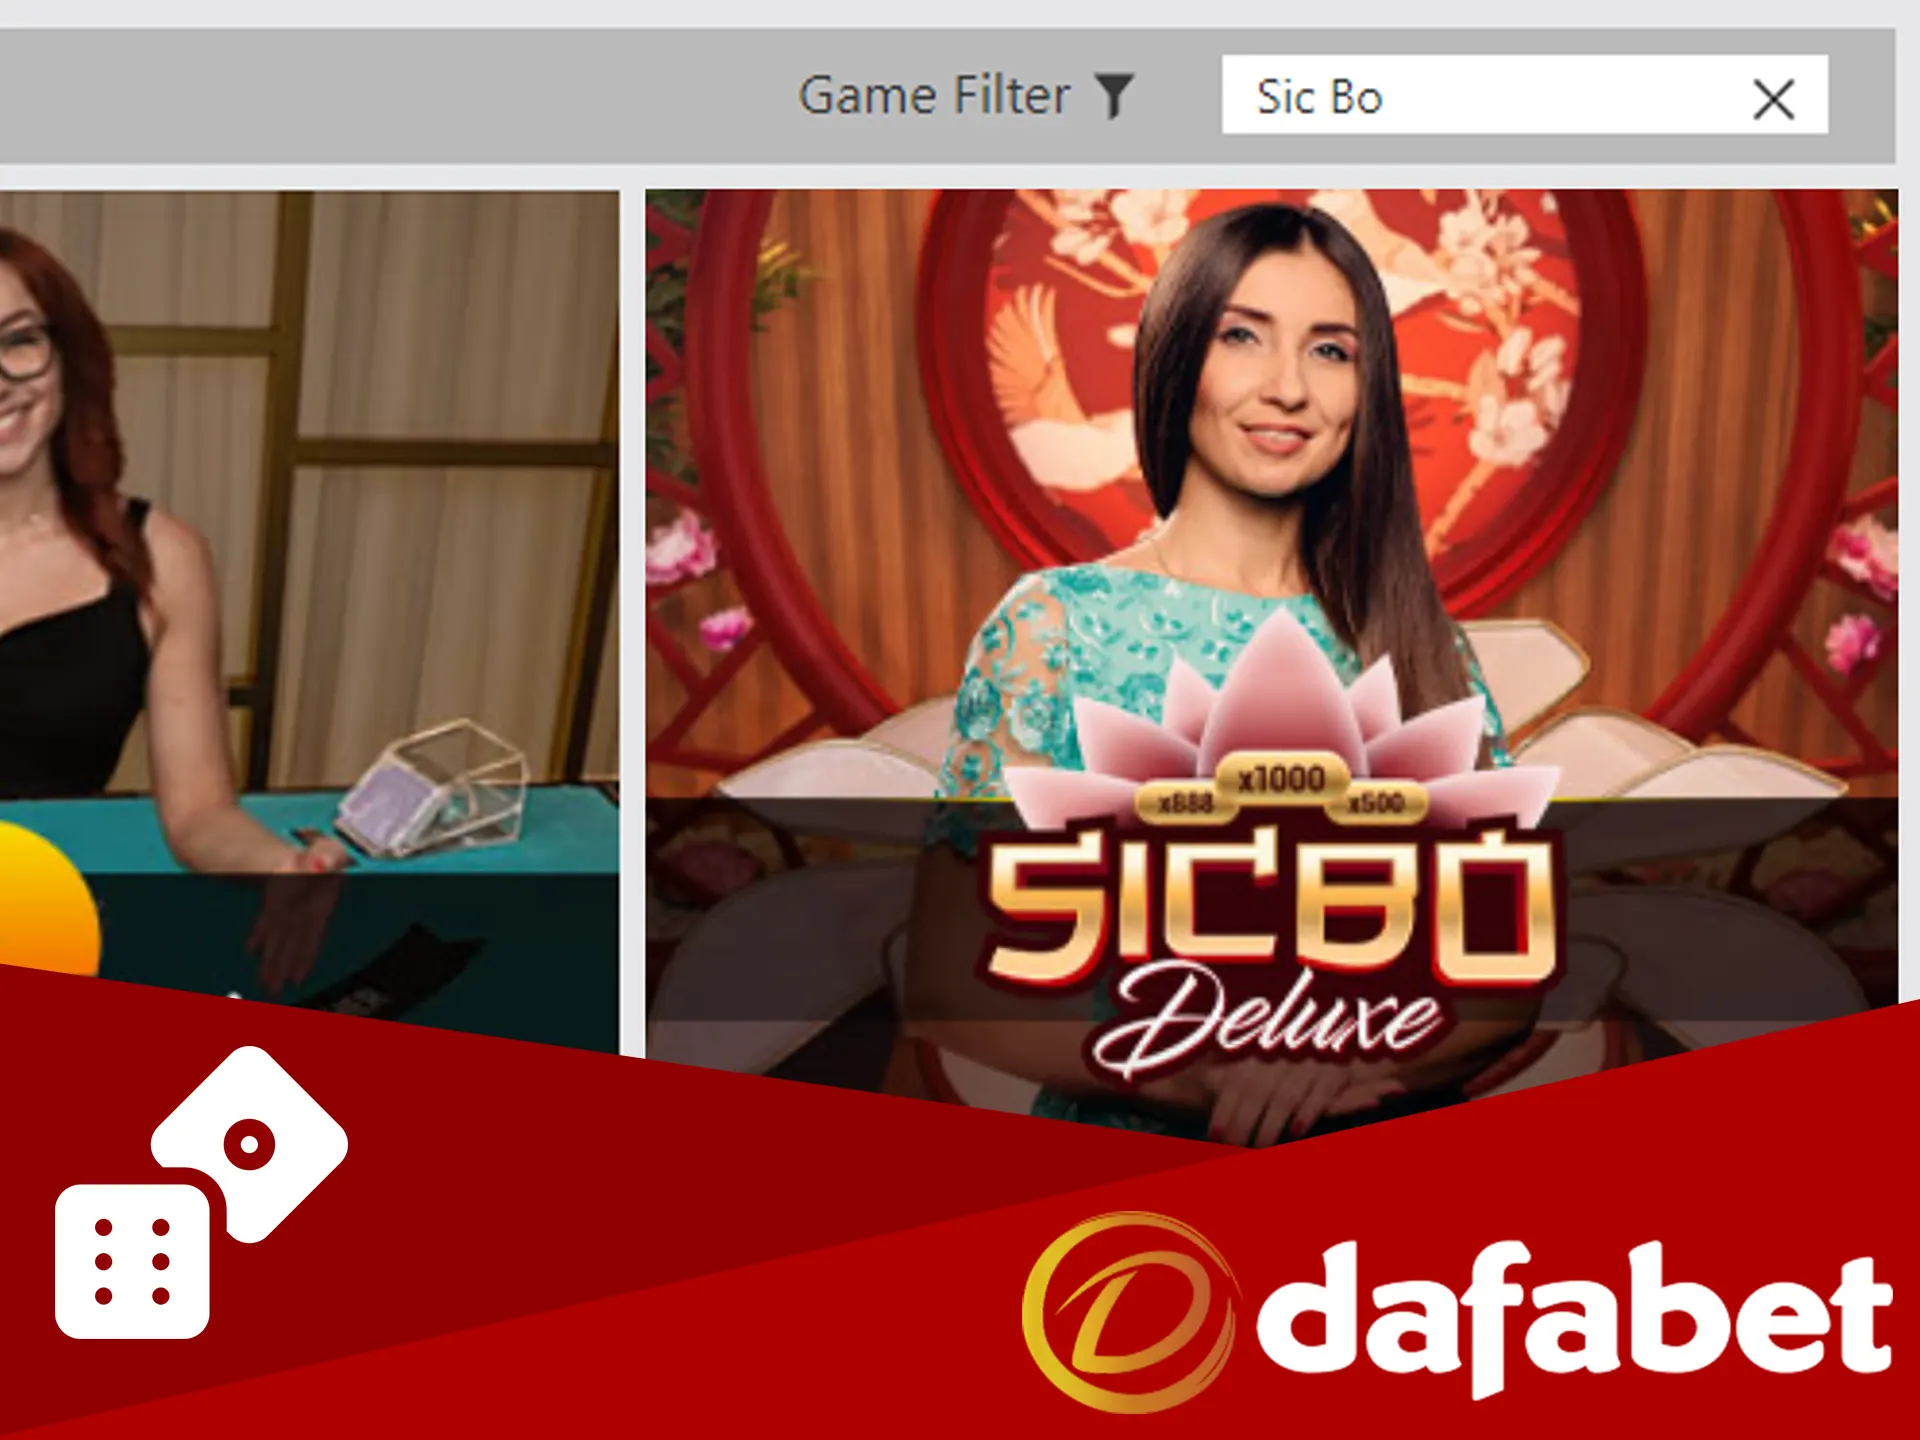 Play an exotic casino game called Sic Bo at Dafabet.